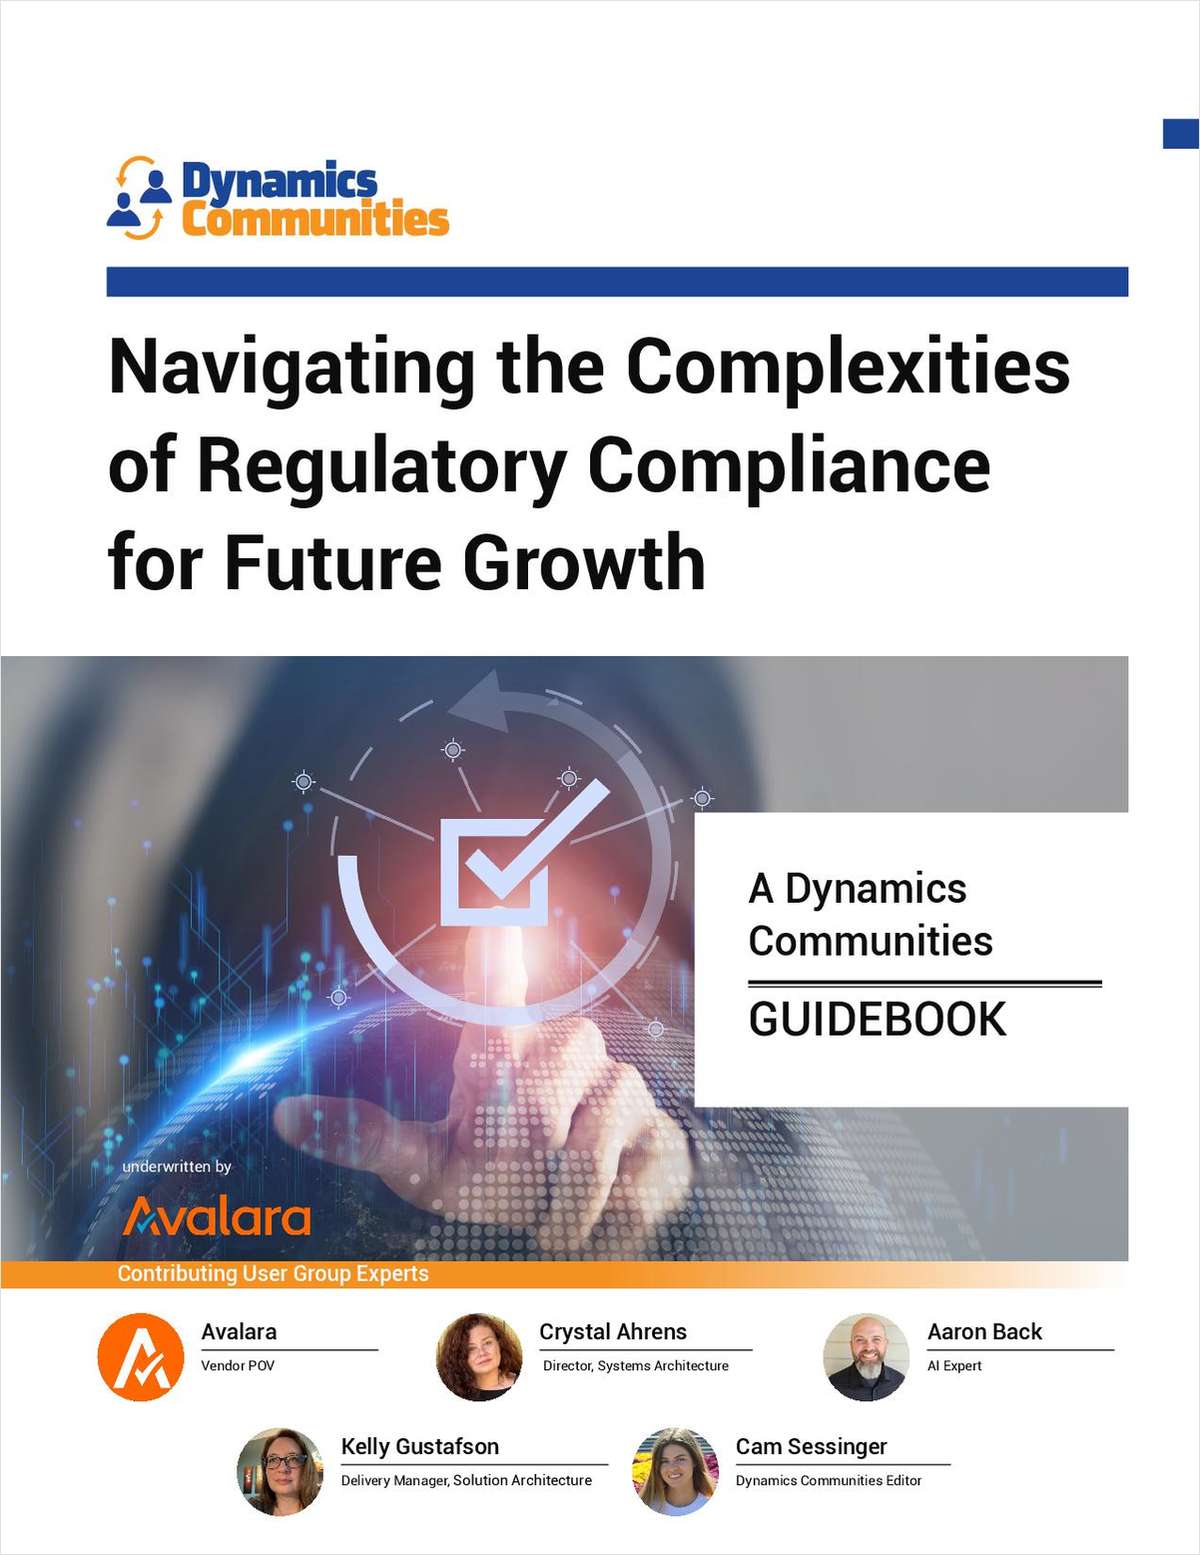 Navigating the Complexities of Regulatory Compliance